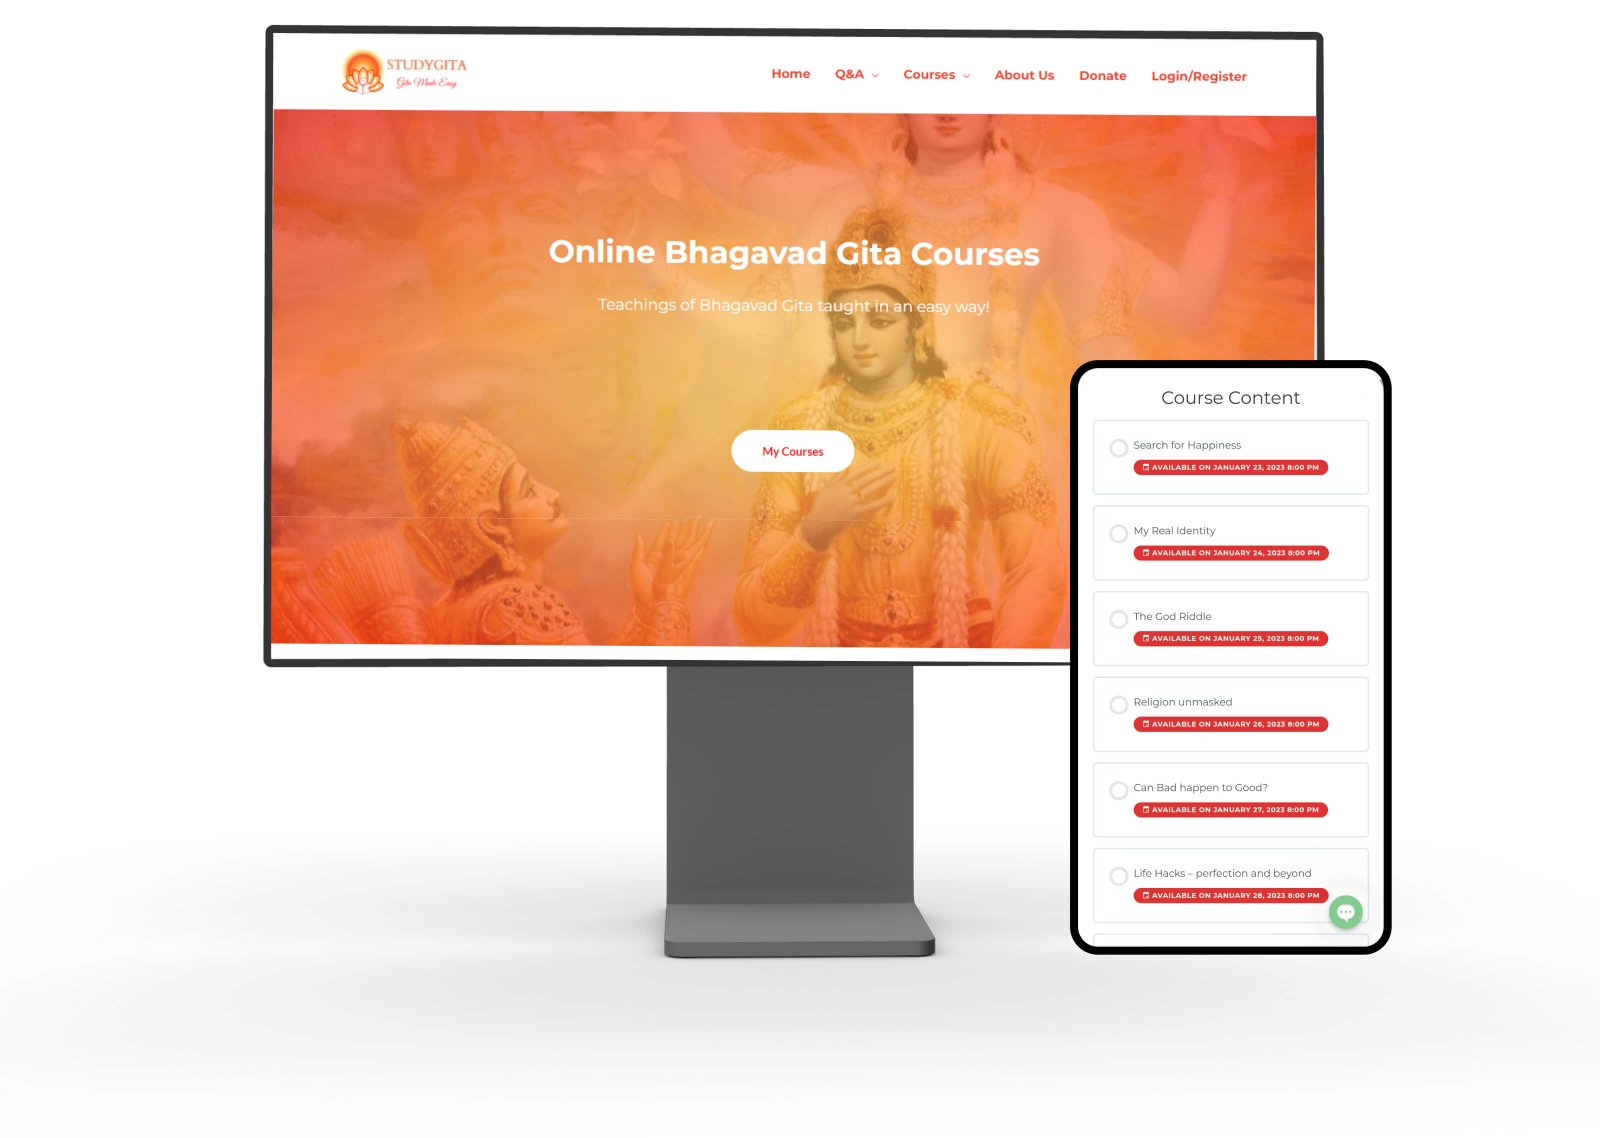 Study Gita is a Learning Management System providing online Bhagavad Gita Courses developed for ISKCON temple by Krishworks